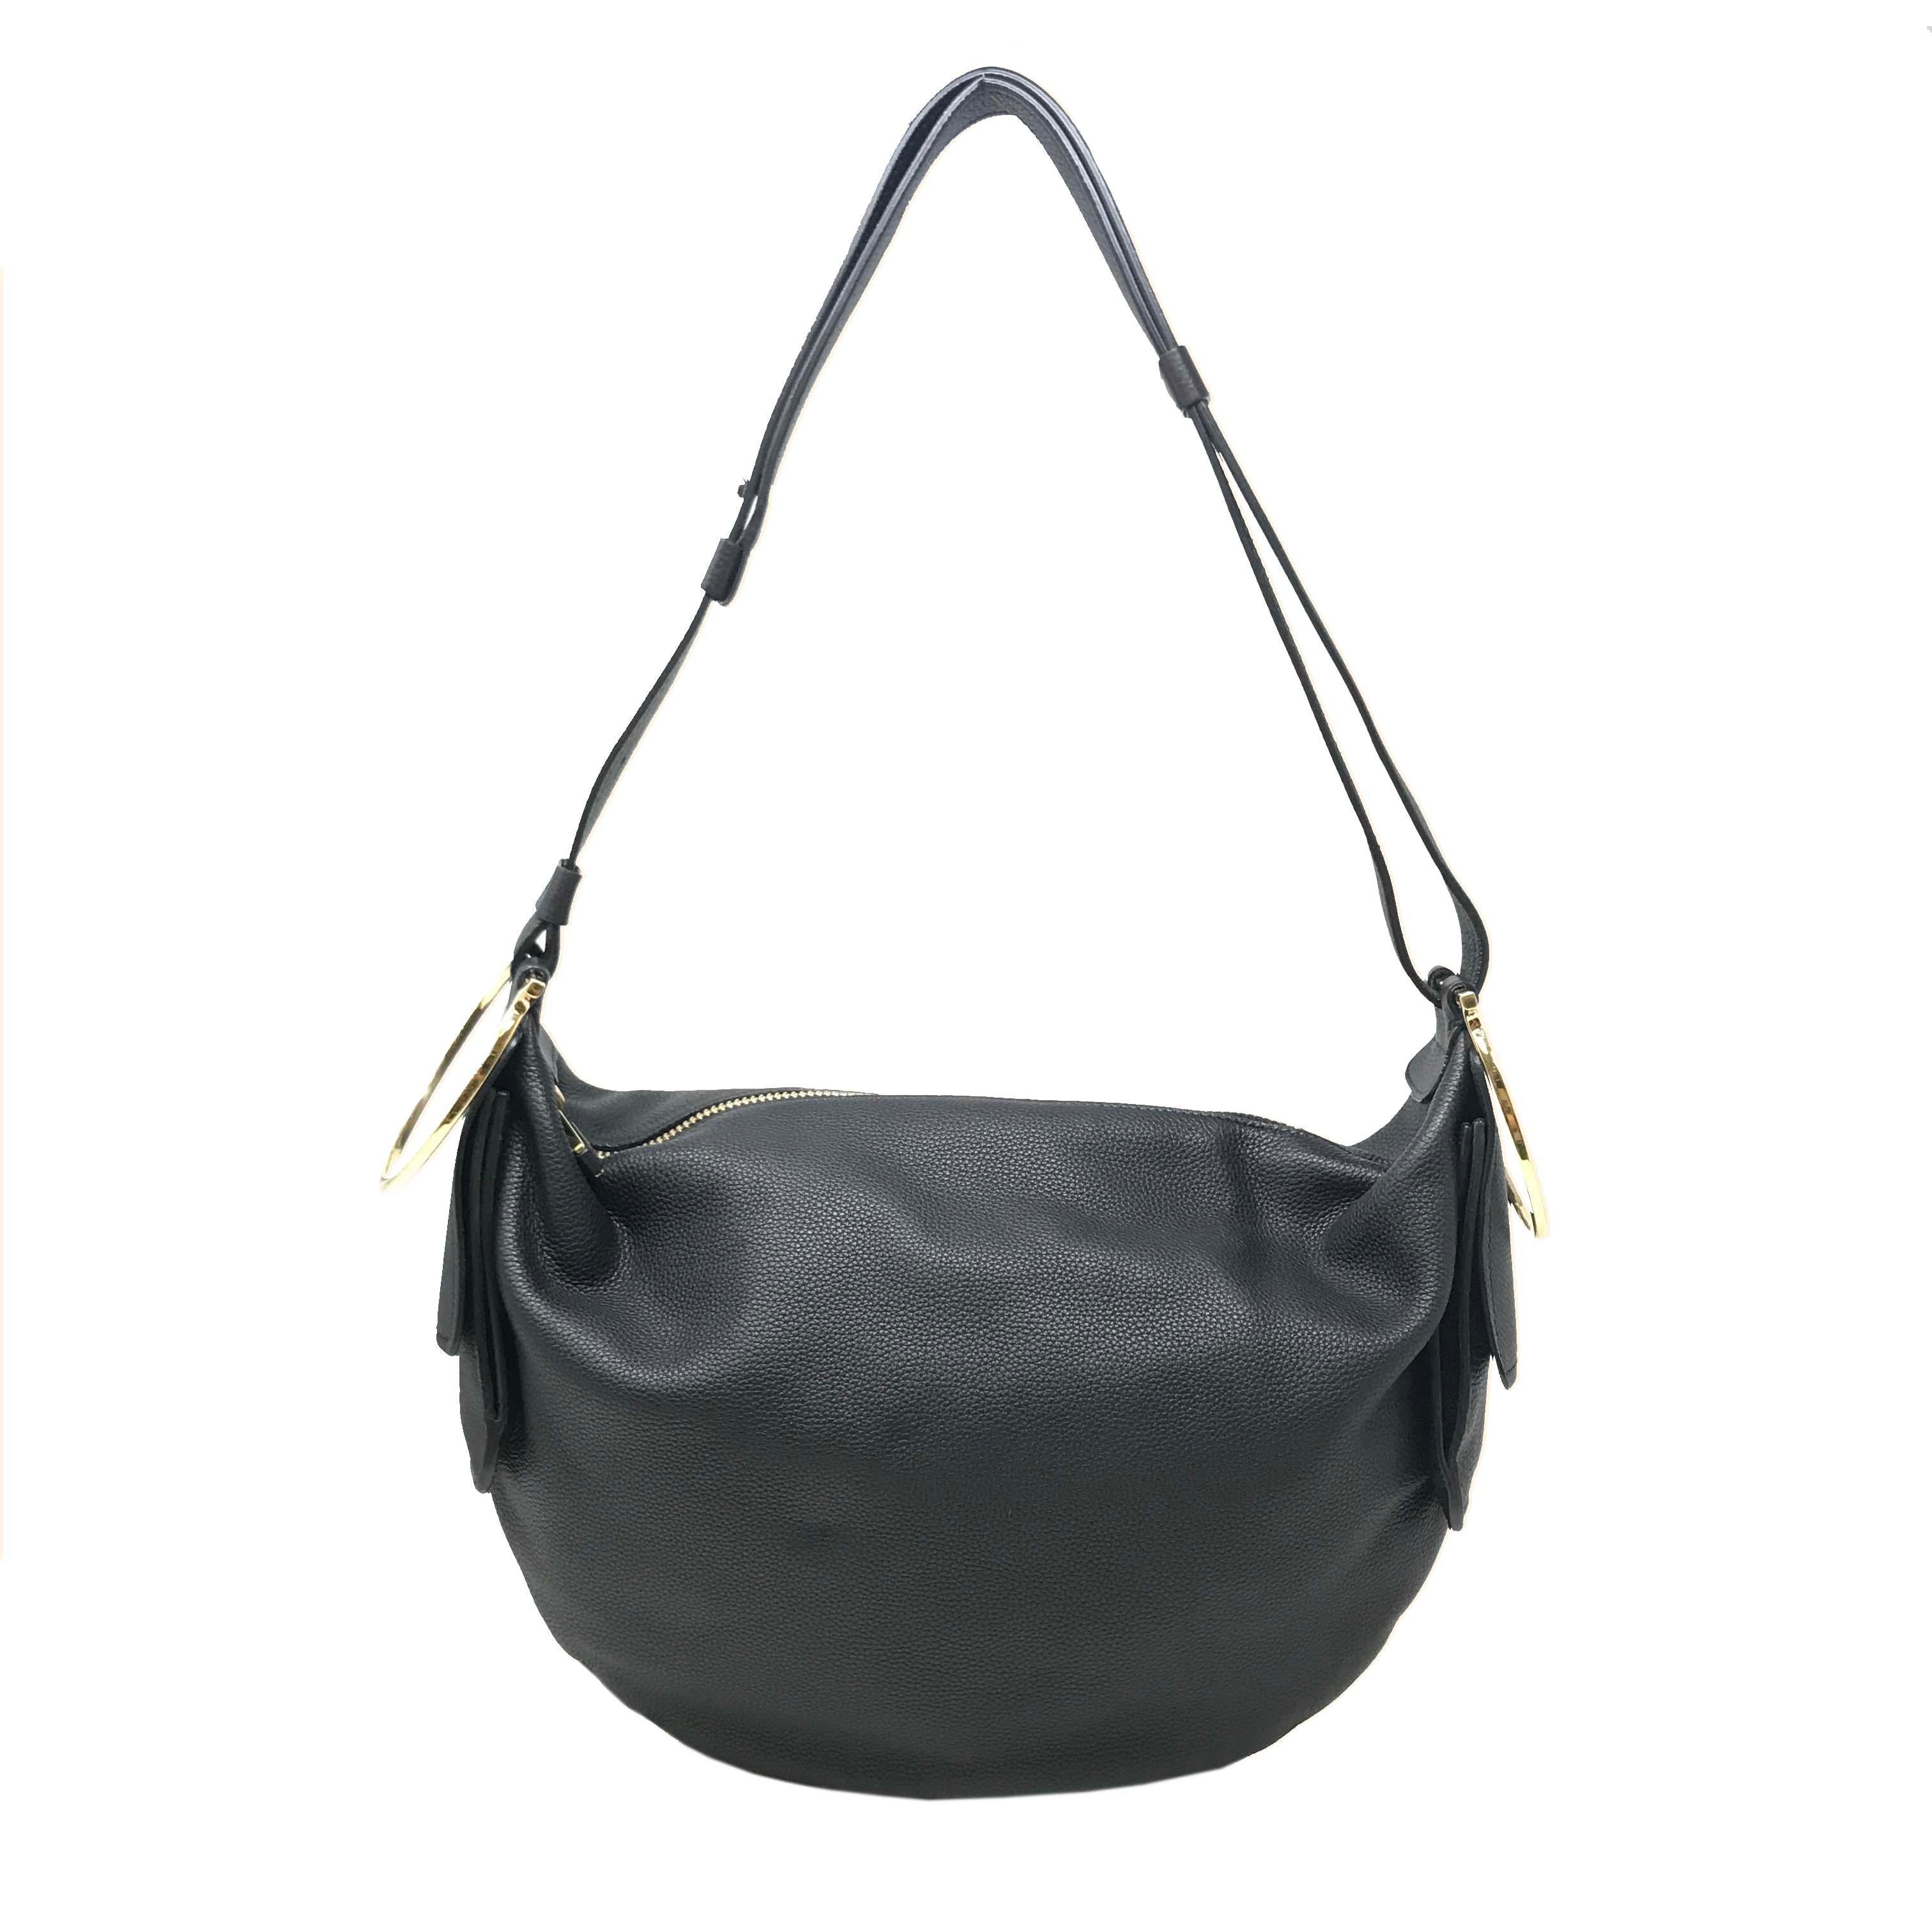 This is pre-owned Salvatore Ferragamo 647216 21F870 Black Leather Hobo Women's Bag. Dust bag is not included. Have some wear sign near zipper except that its perfect.